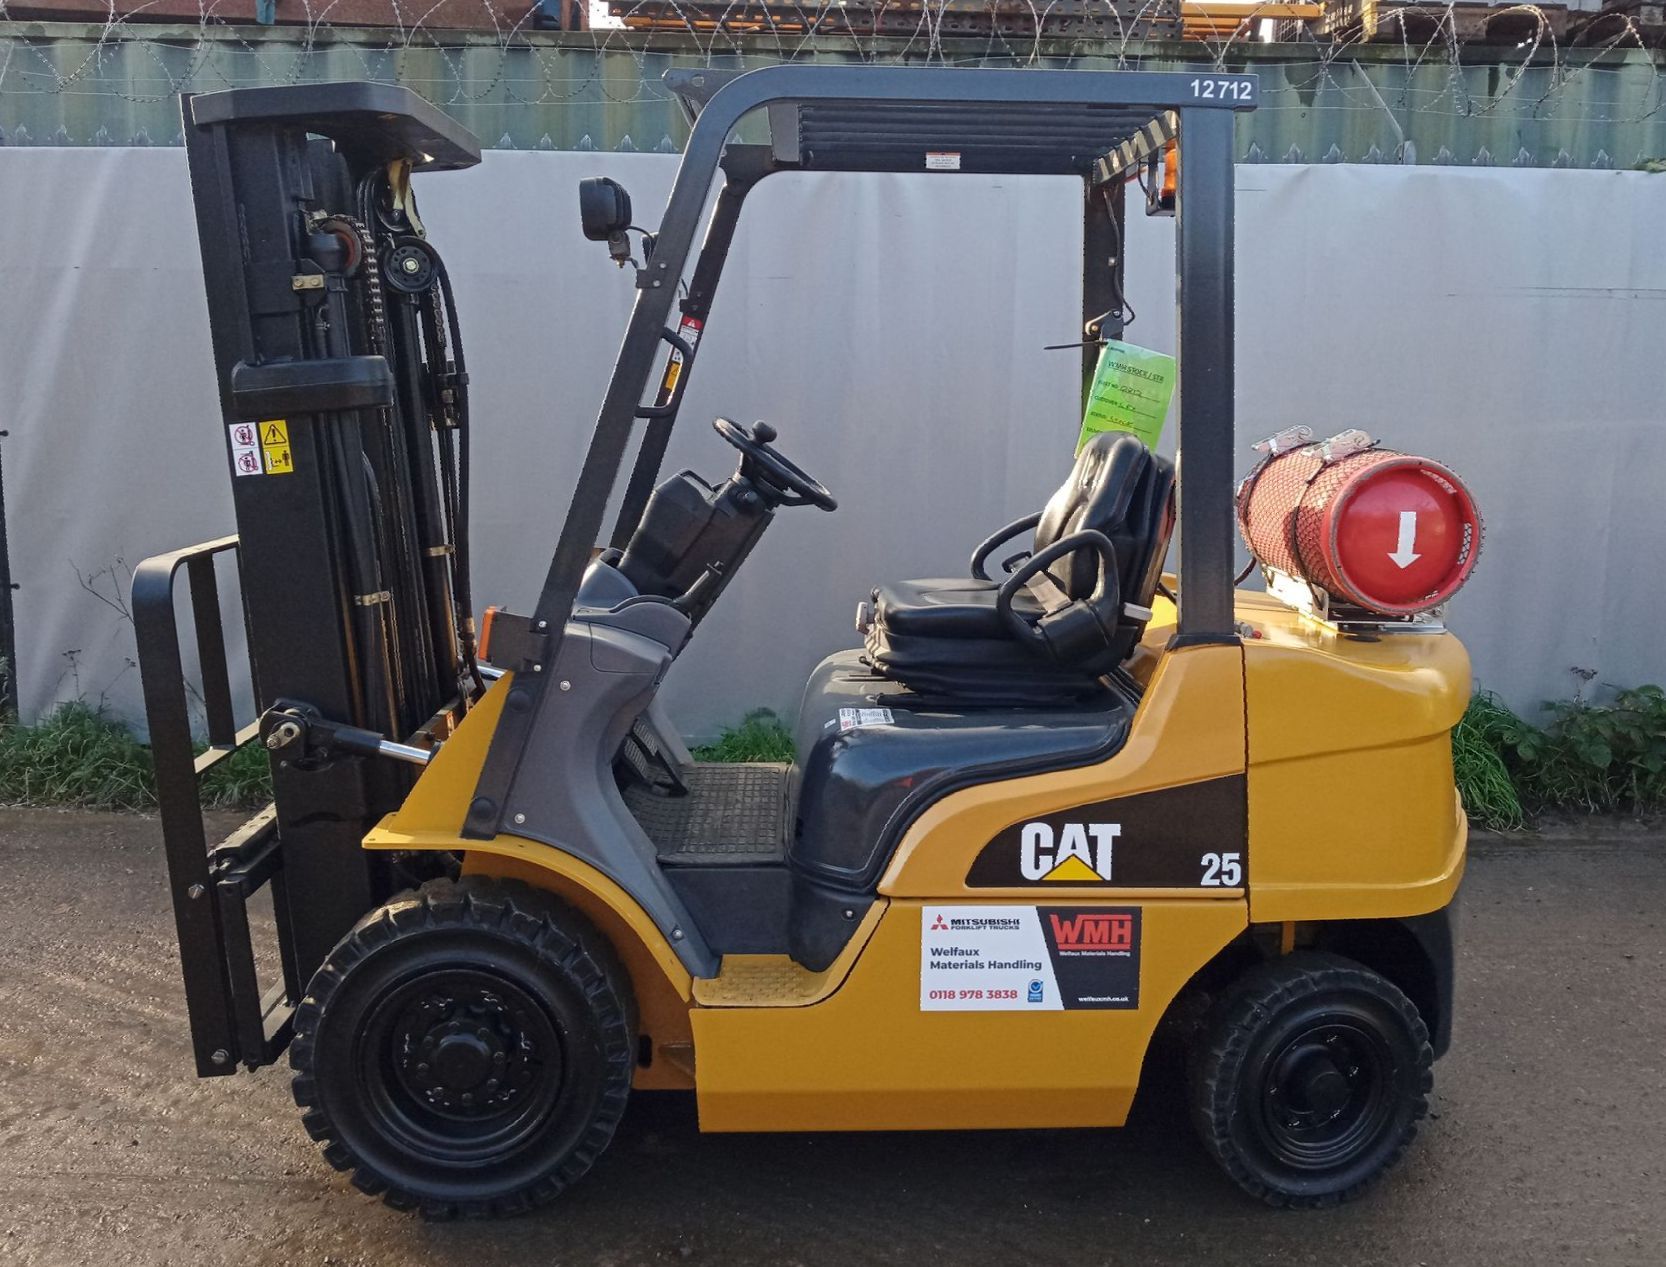 A yellow and black cat forklift is parked on the side of the road